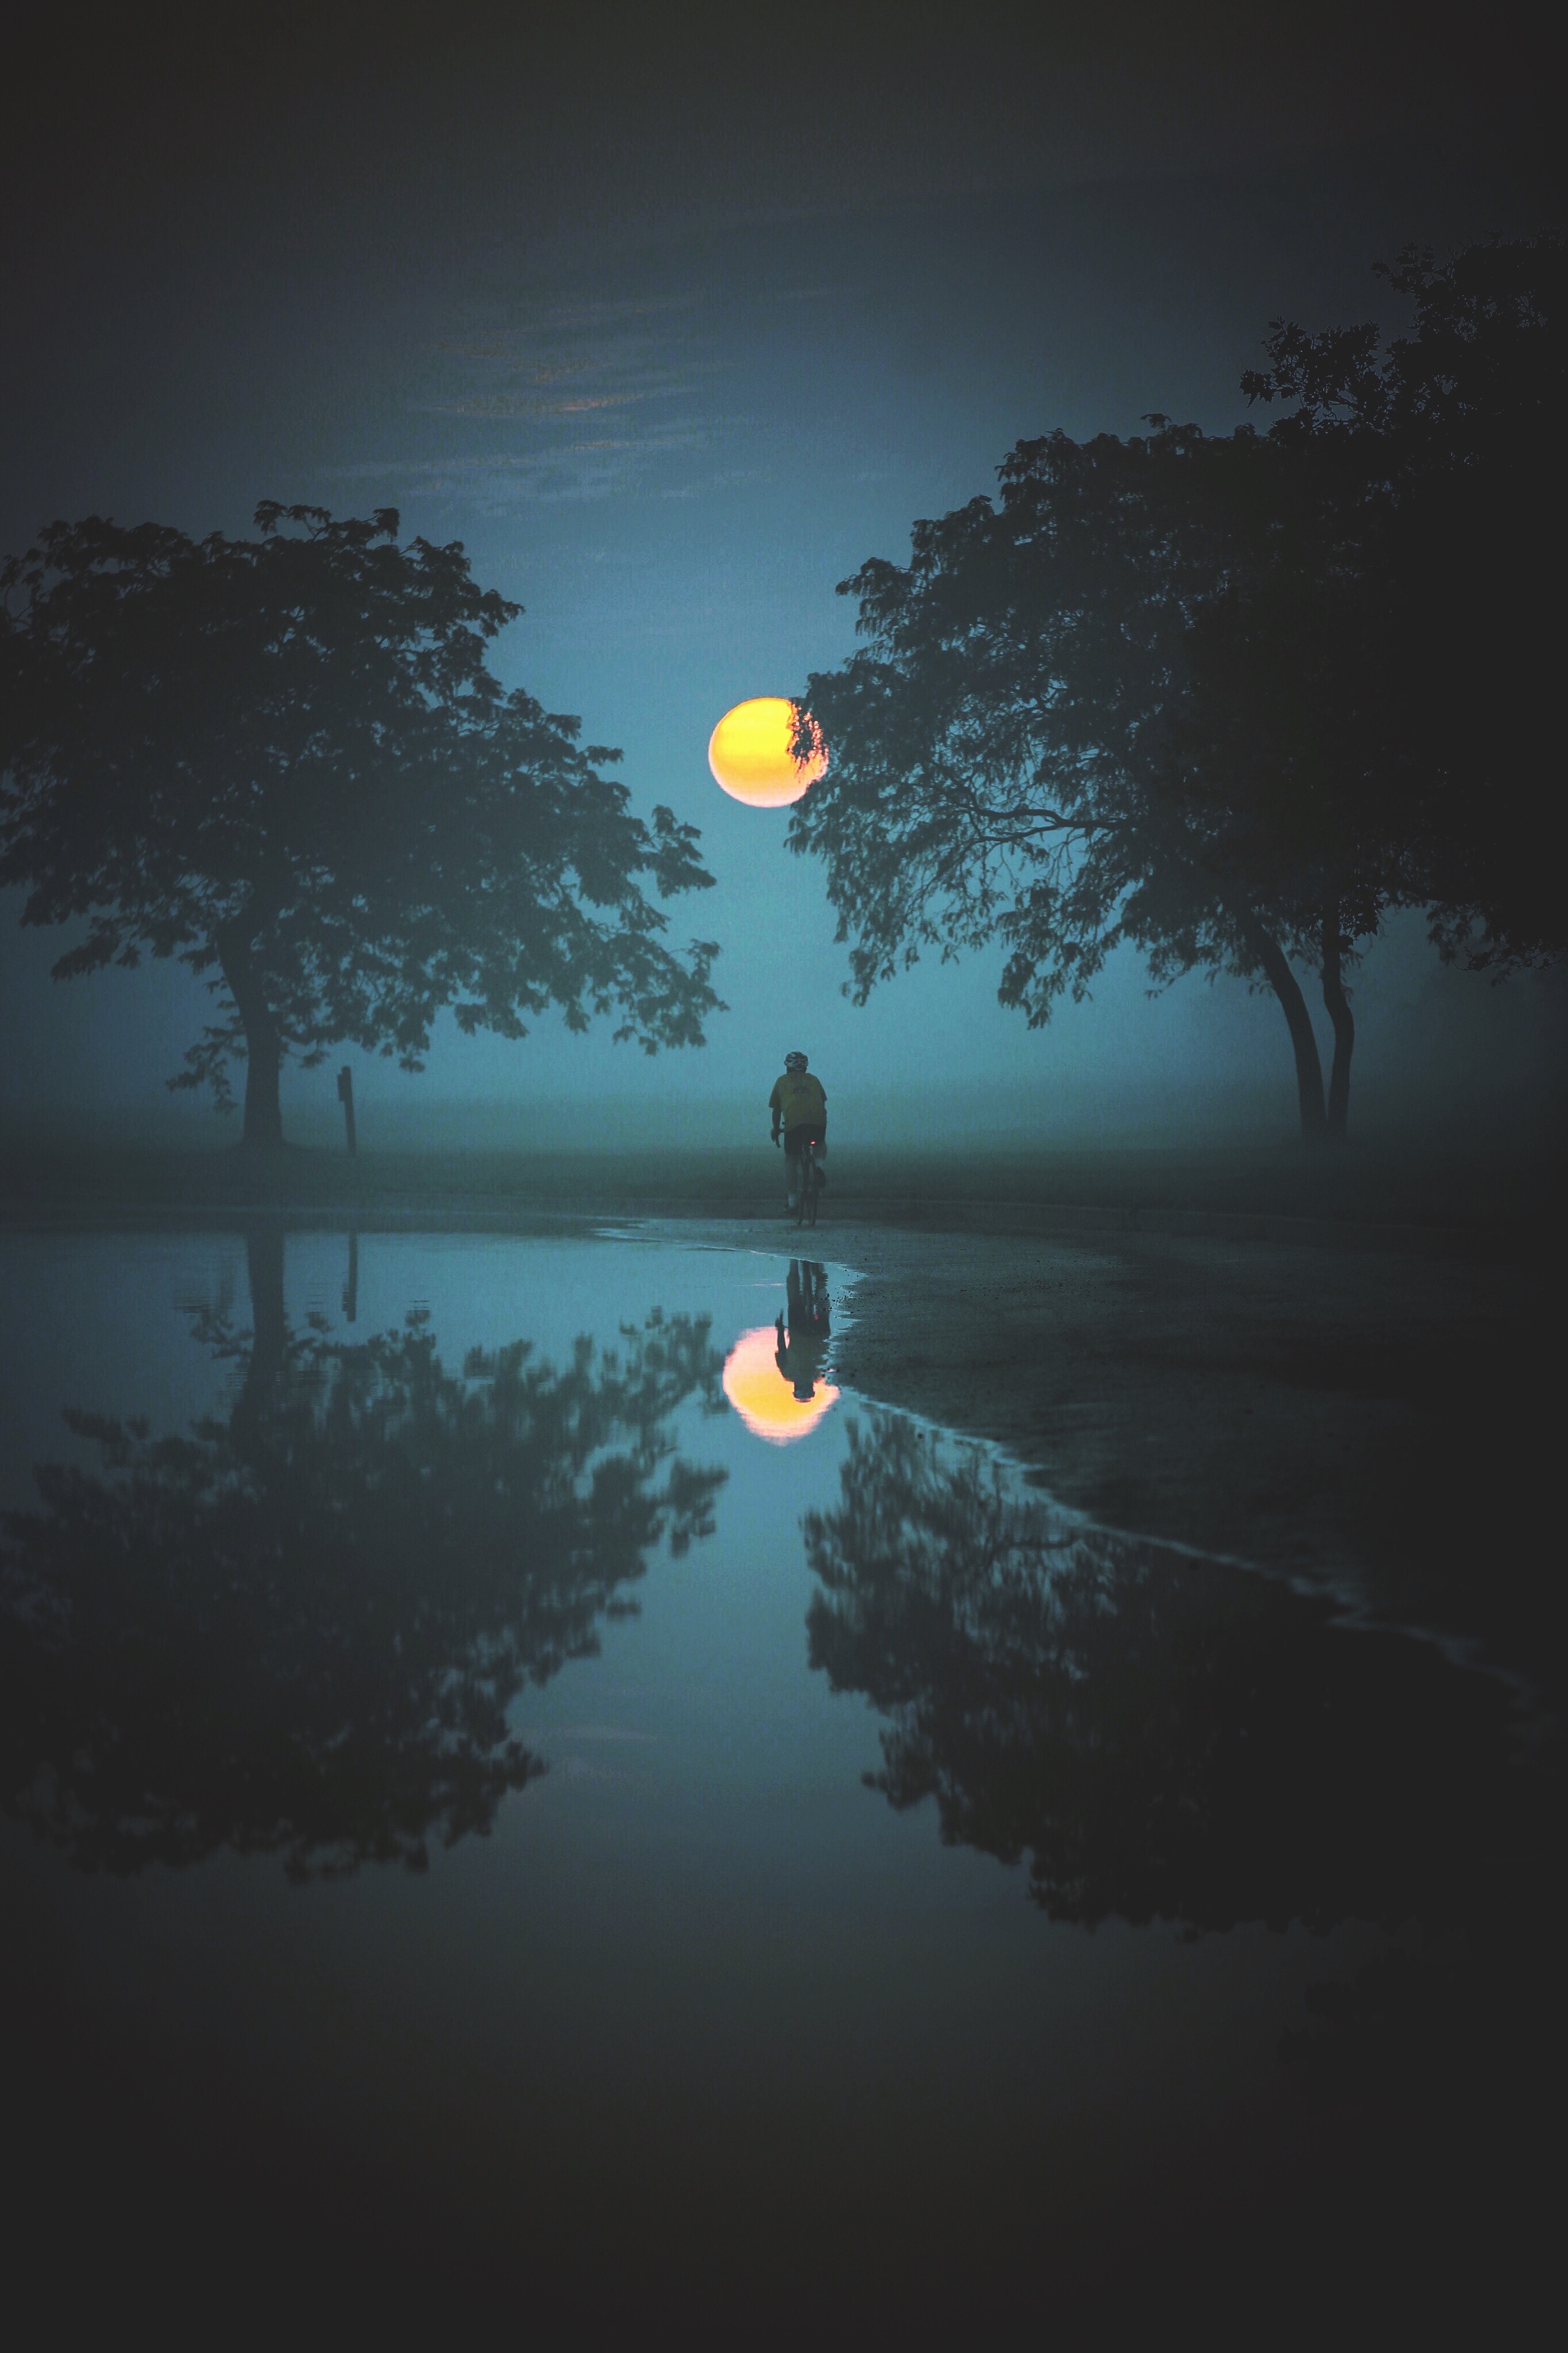 android moon, reflection, nature, water, trees, fog, cyclist